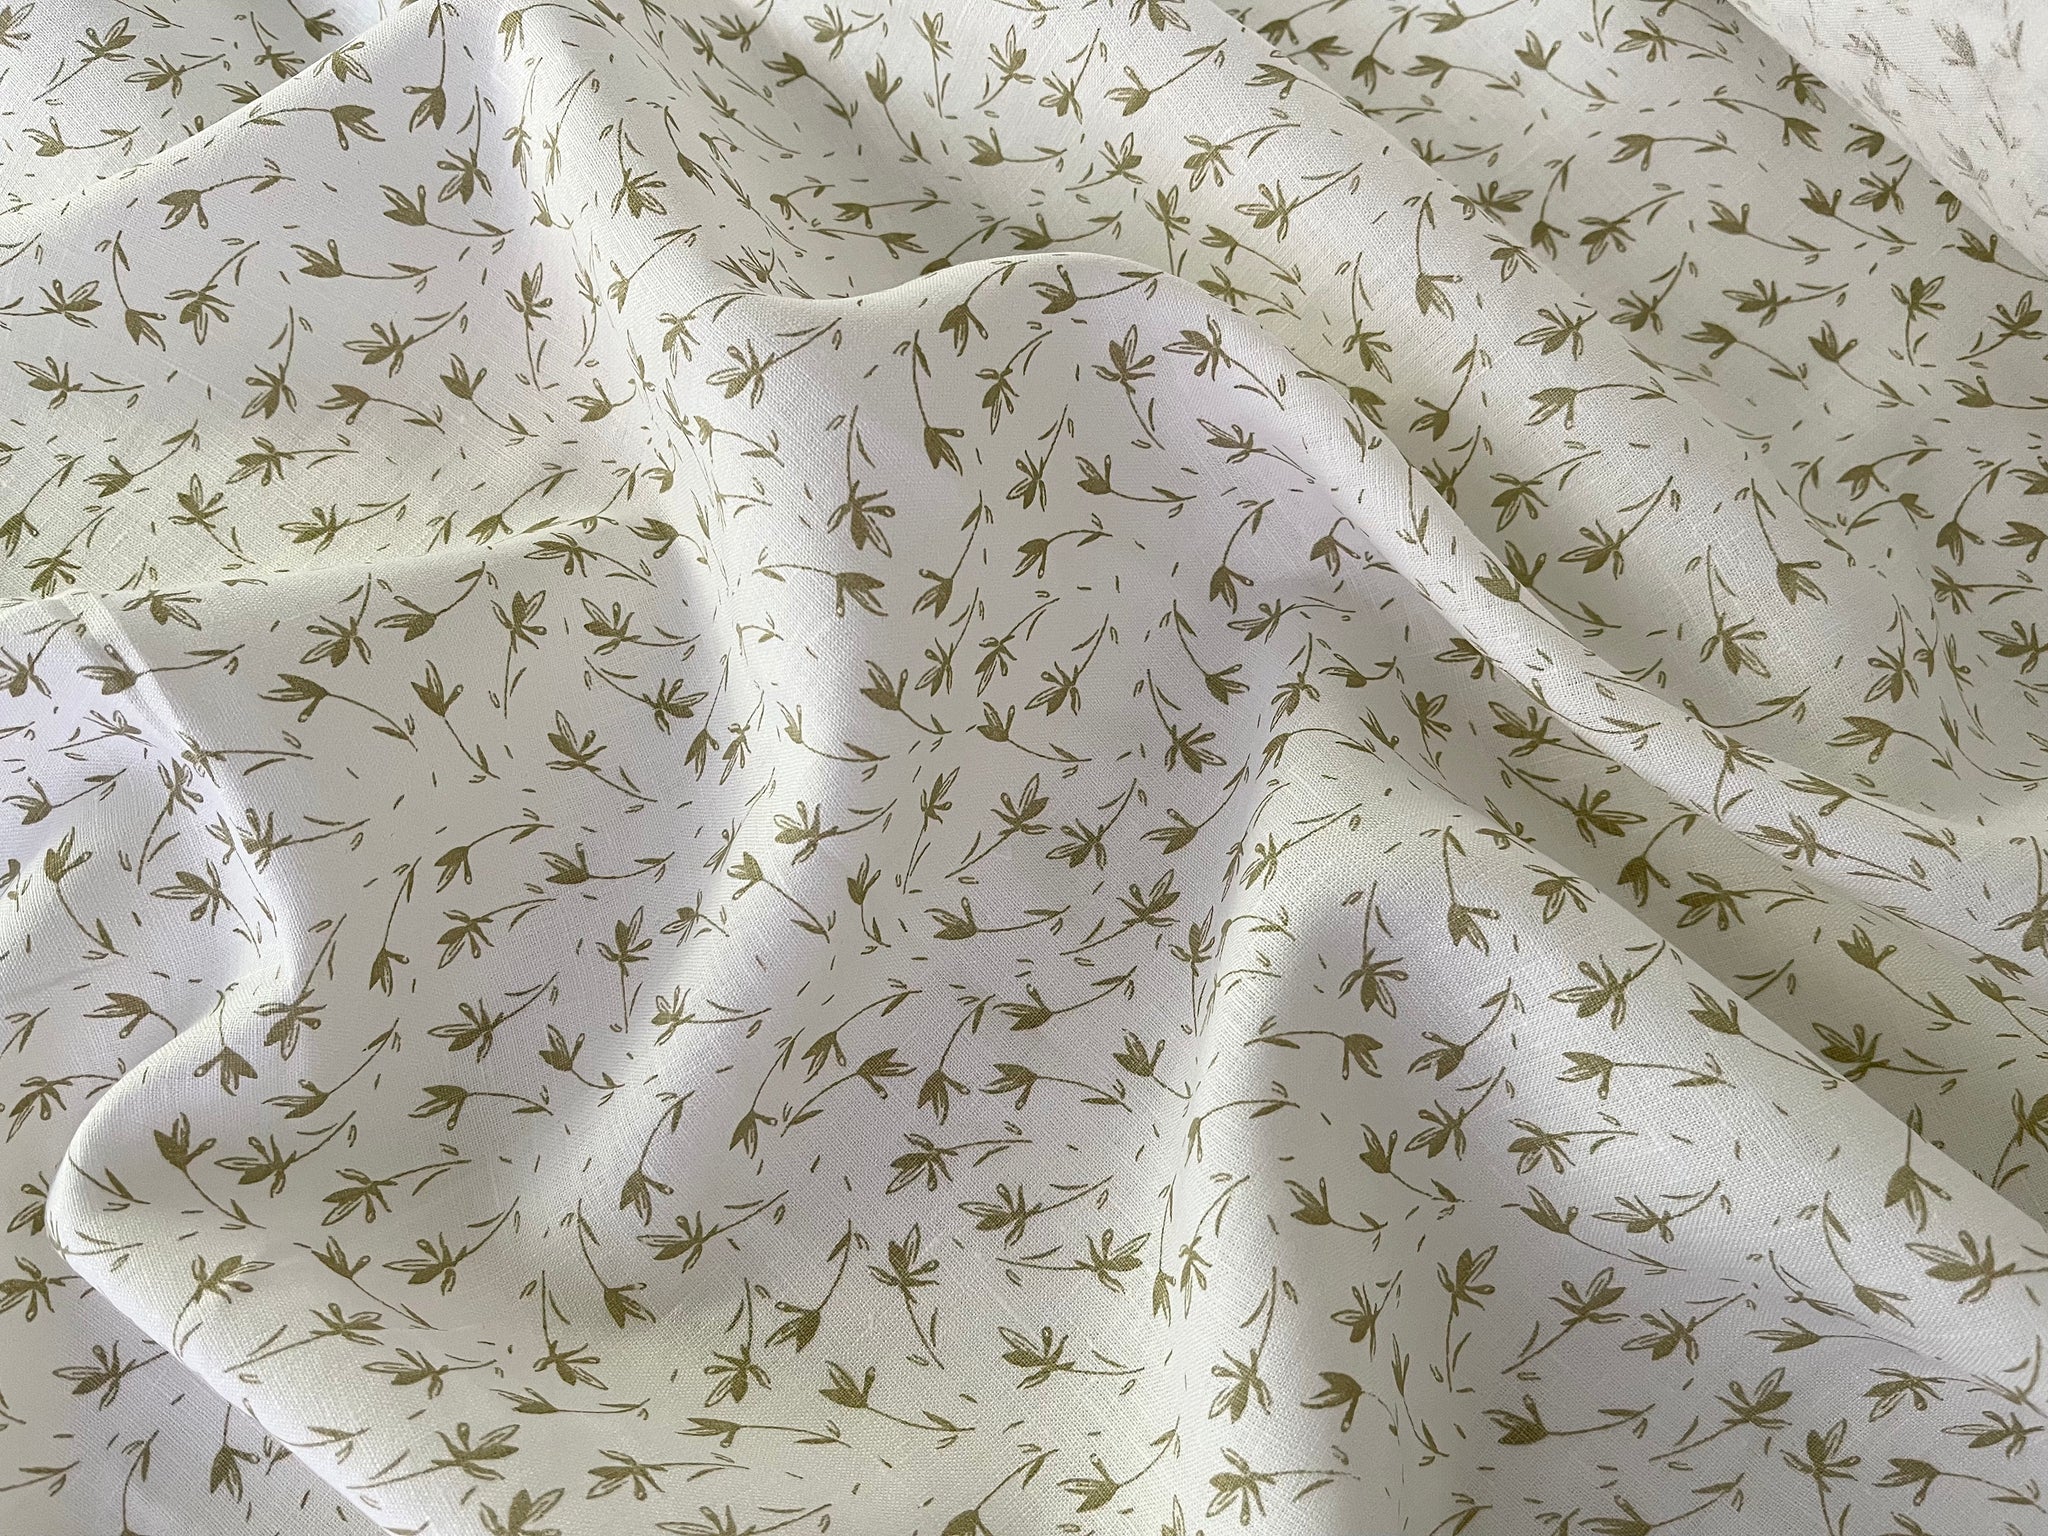 Deadstock Linen Fabric - Foliage Print in White and Hay